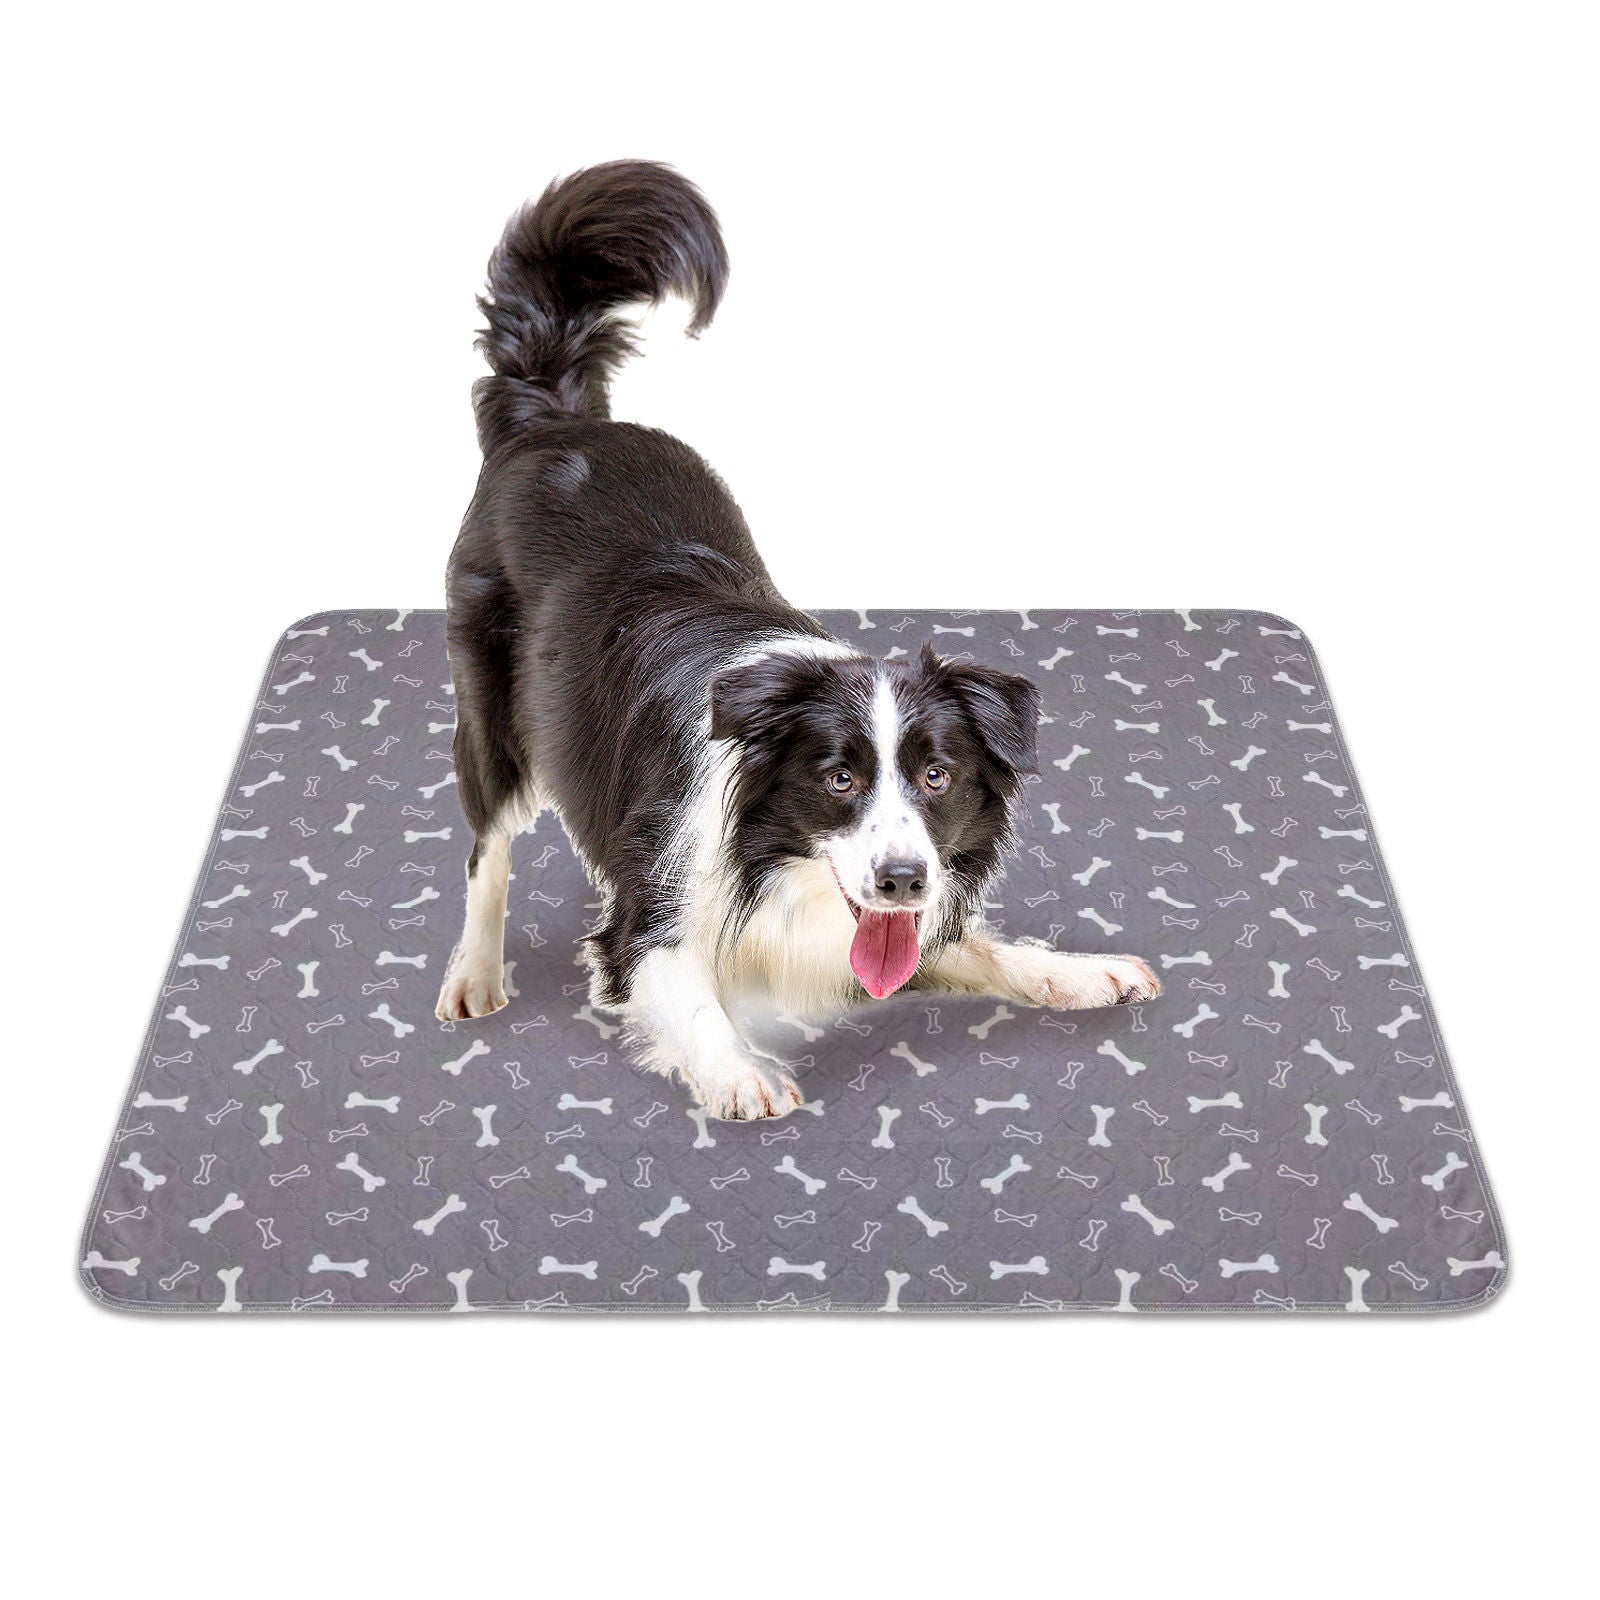 Pawfriends Washable Pet Dog Pee Pad Reusable Cat Puppy Training Wee Absorbent Mat Bed 40x60